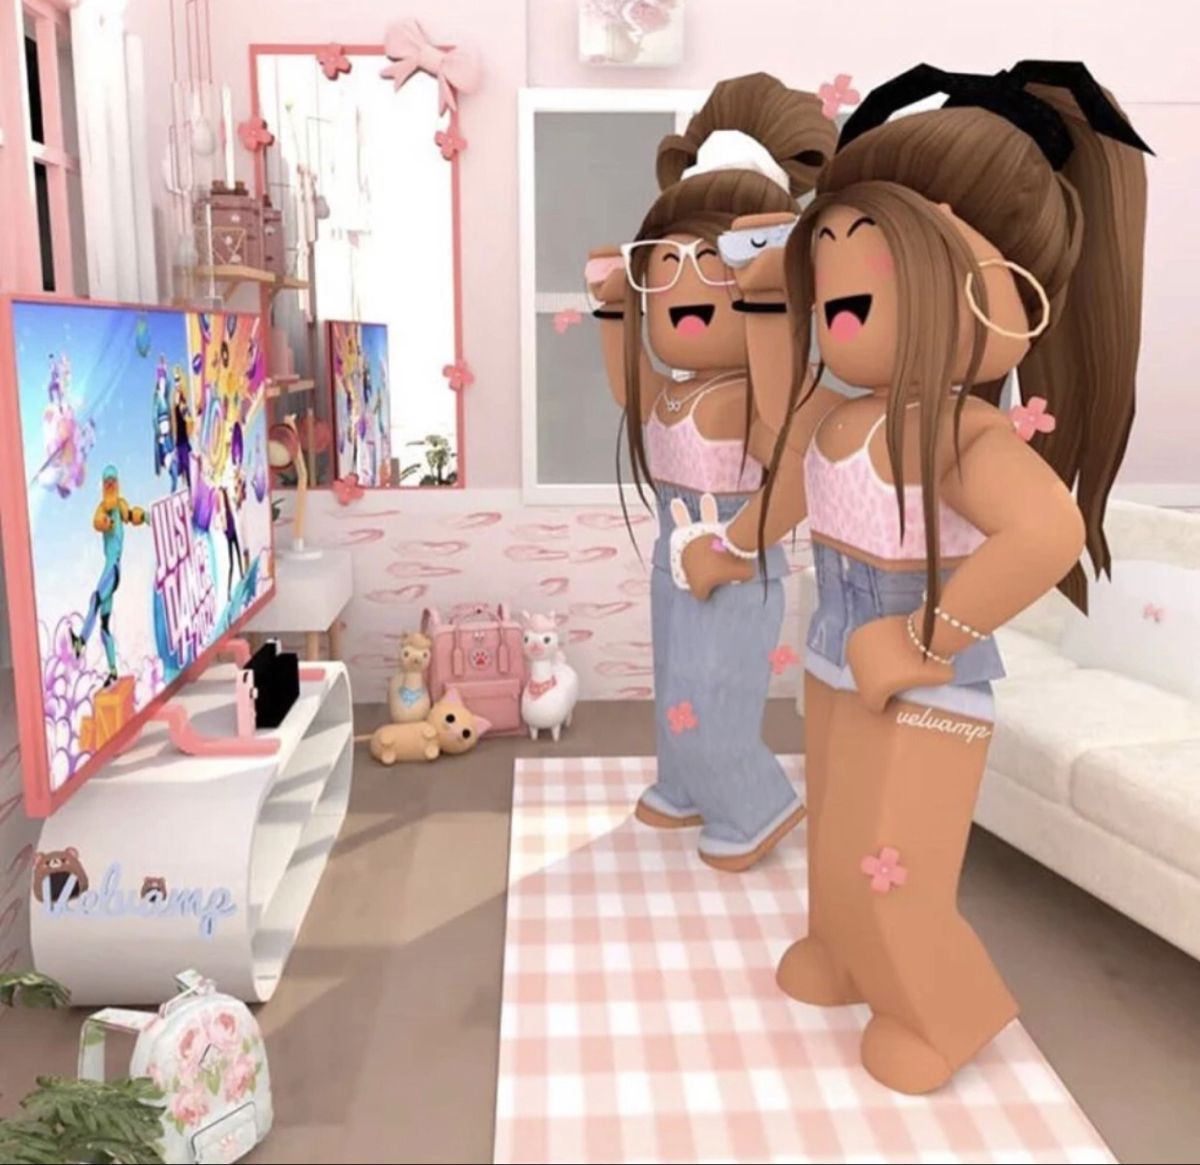 Roblox cute things. Cute tumblr wallpaper, Roblox animation, Roblox picture